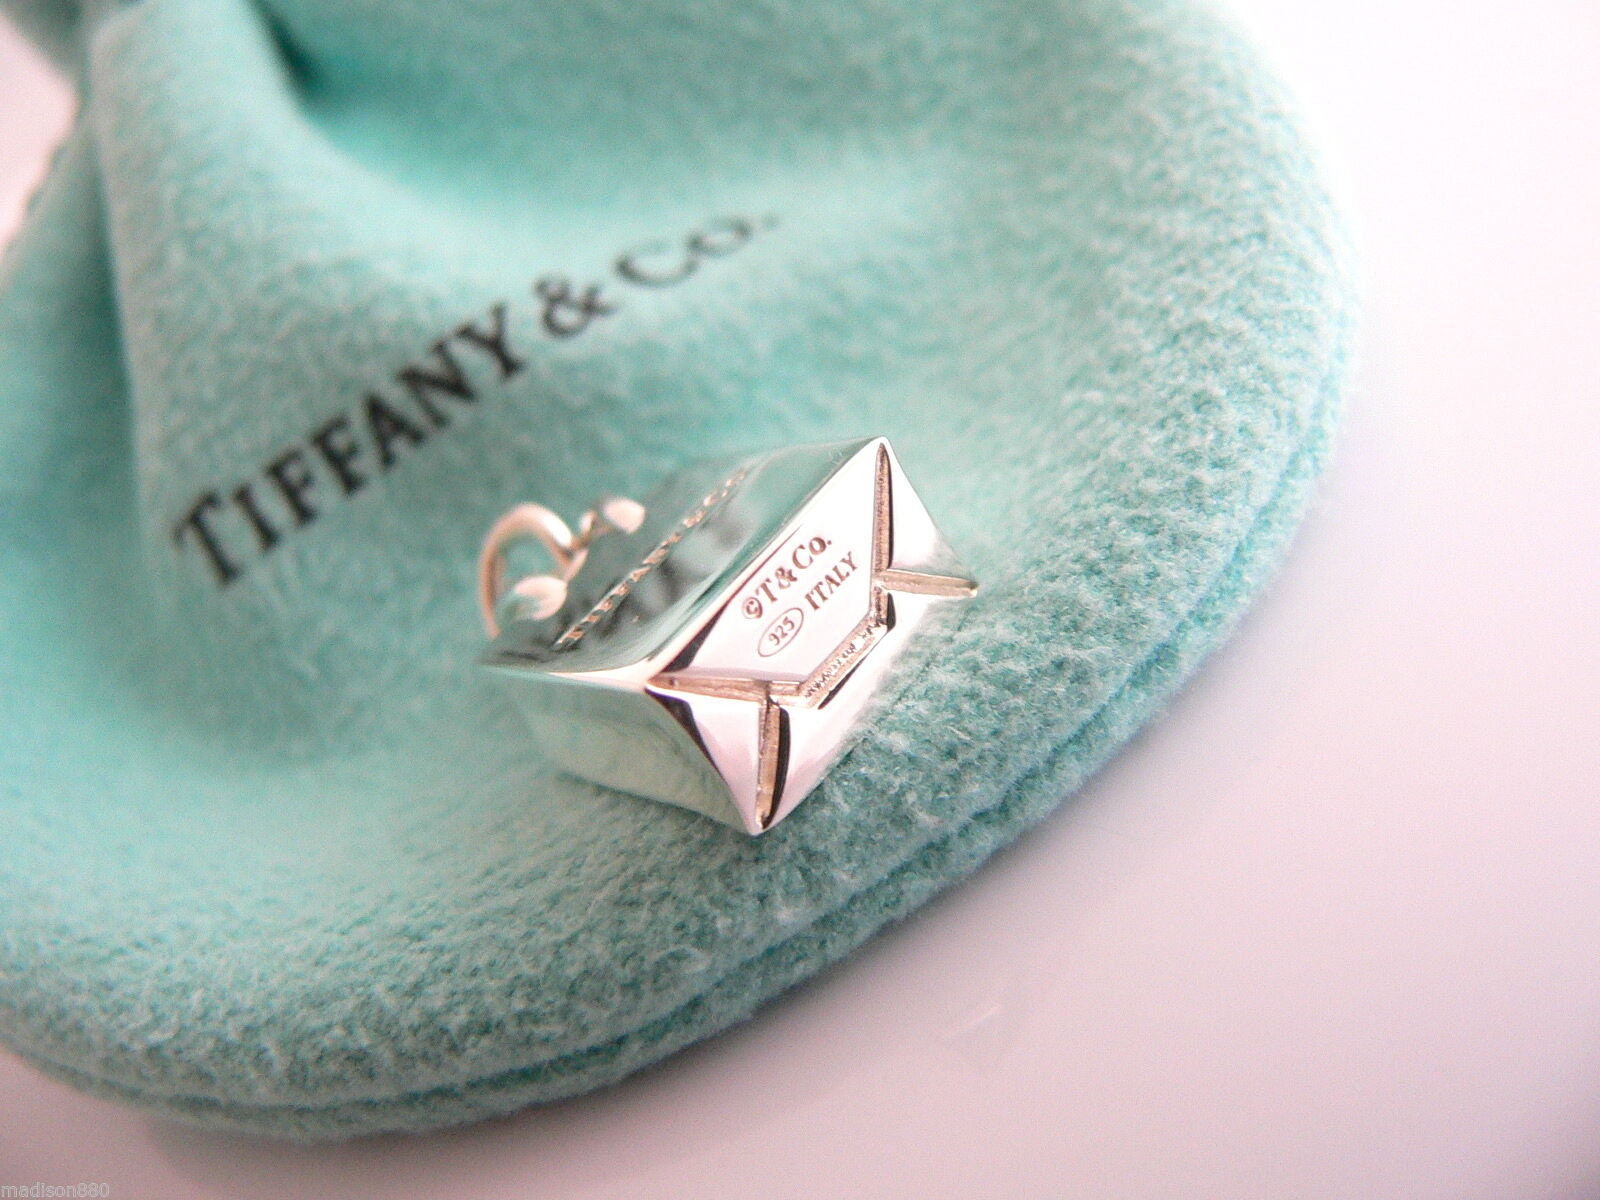 Sold at Auction: Tiffany & Co. - a shopping bag charm with Tiffany